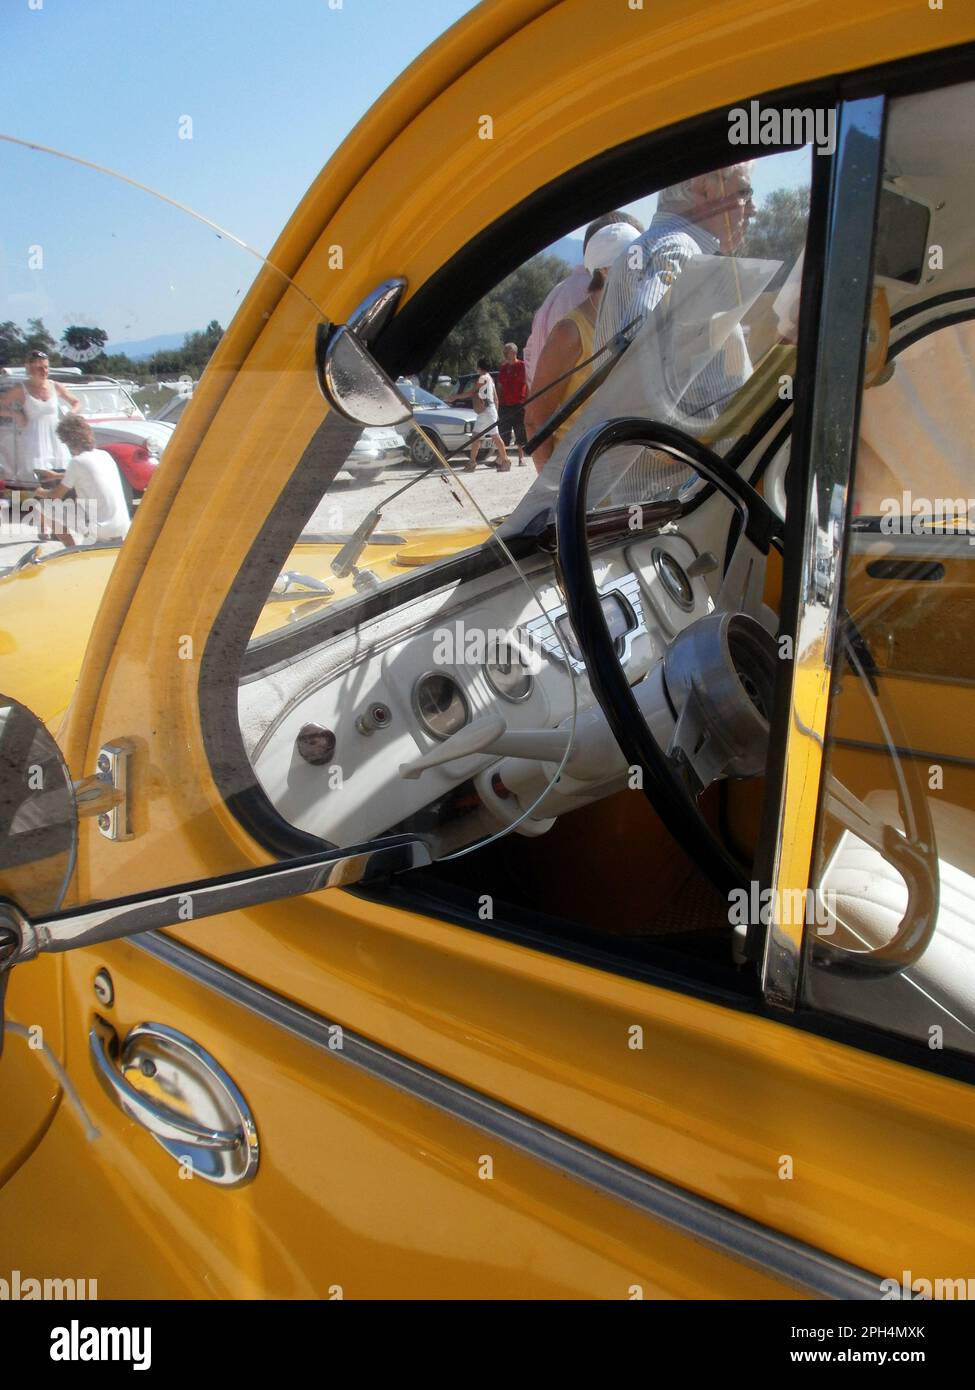 Le Bourget du lac, France - August 19th 2012 : Public exhibition of classic cars. Interior of a yellow Renault 4CV grand luxe. Stock Photo